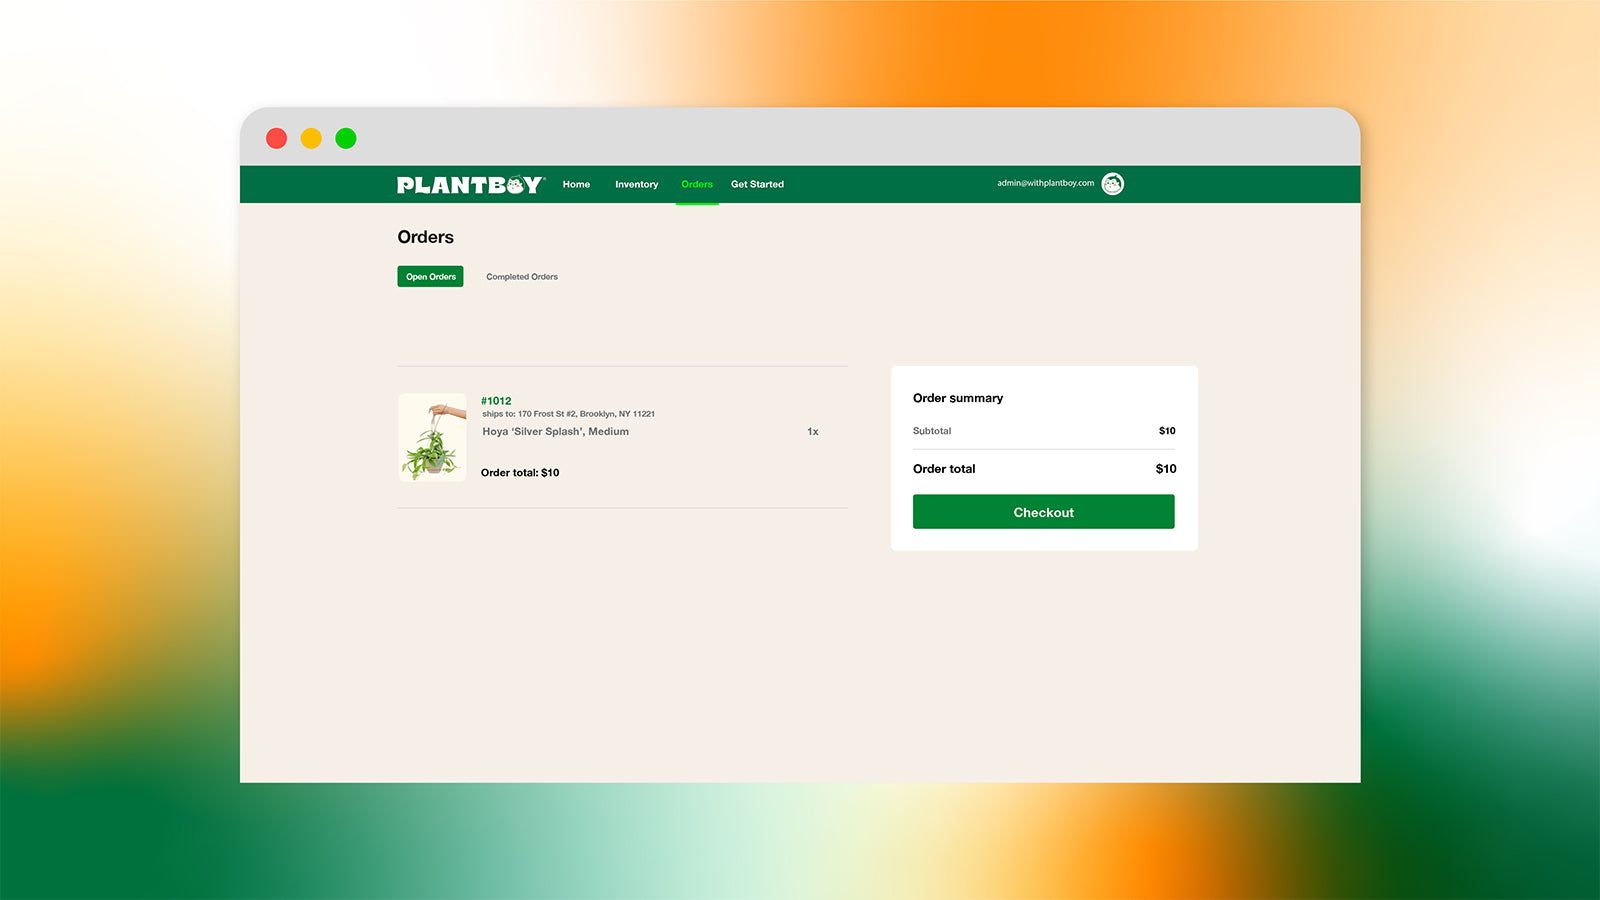 Screenshot of the orders page in the Plantboy application